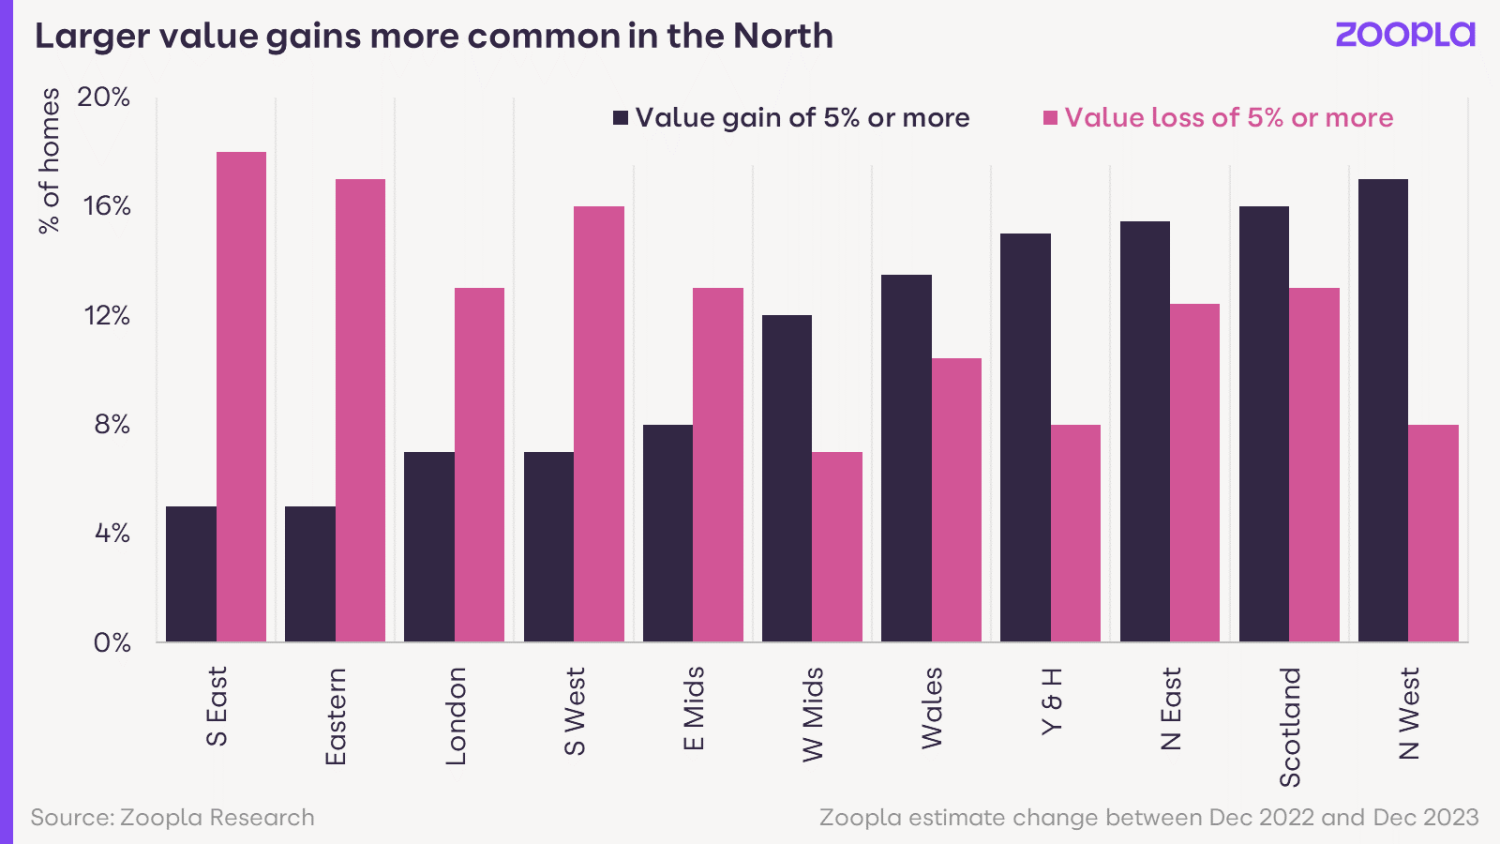 Graph showing that larger value gains are more common in the North